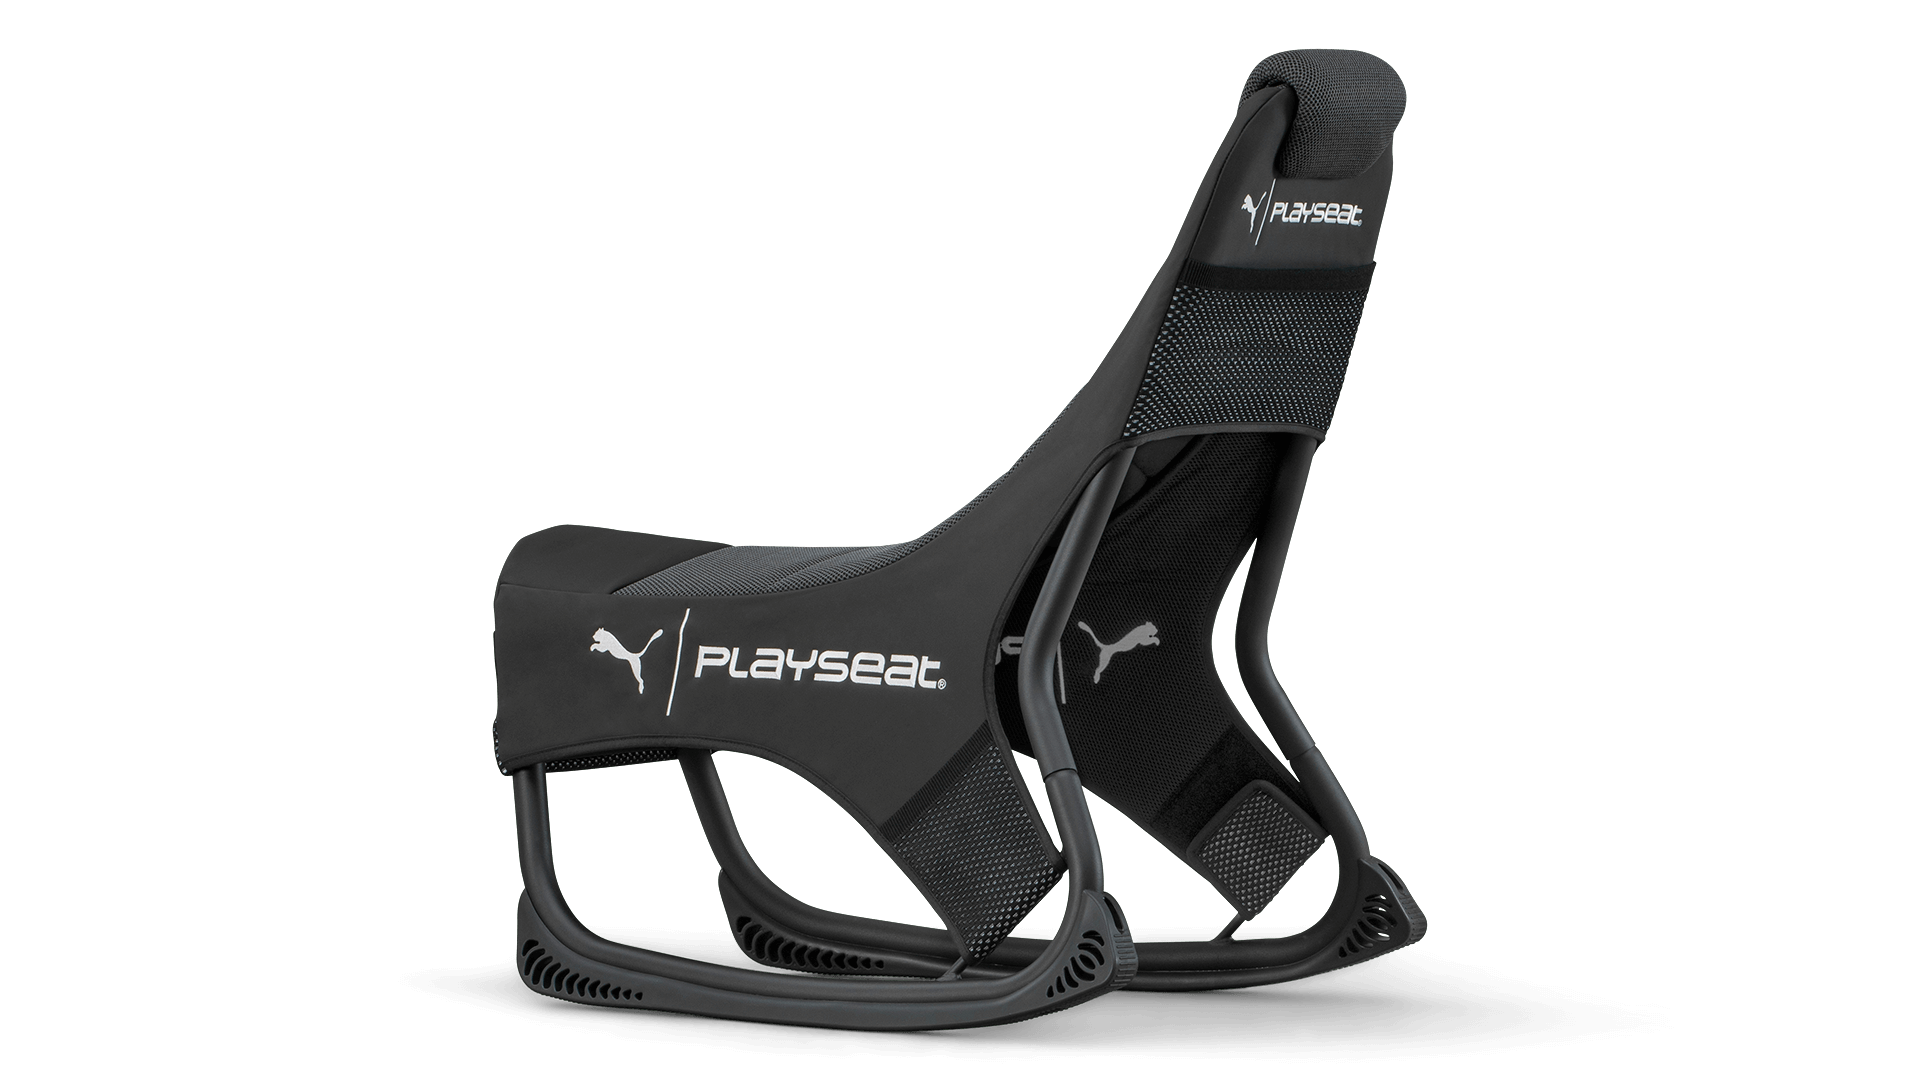 playseat-go-puma-active-black-gaming-seat-back-angle-view-1920x1080-1.png